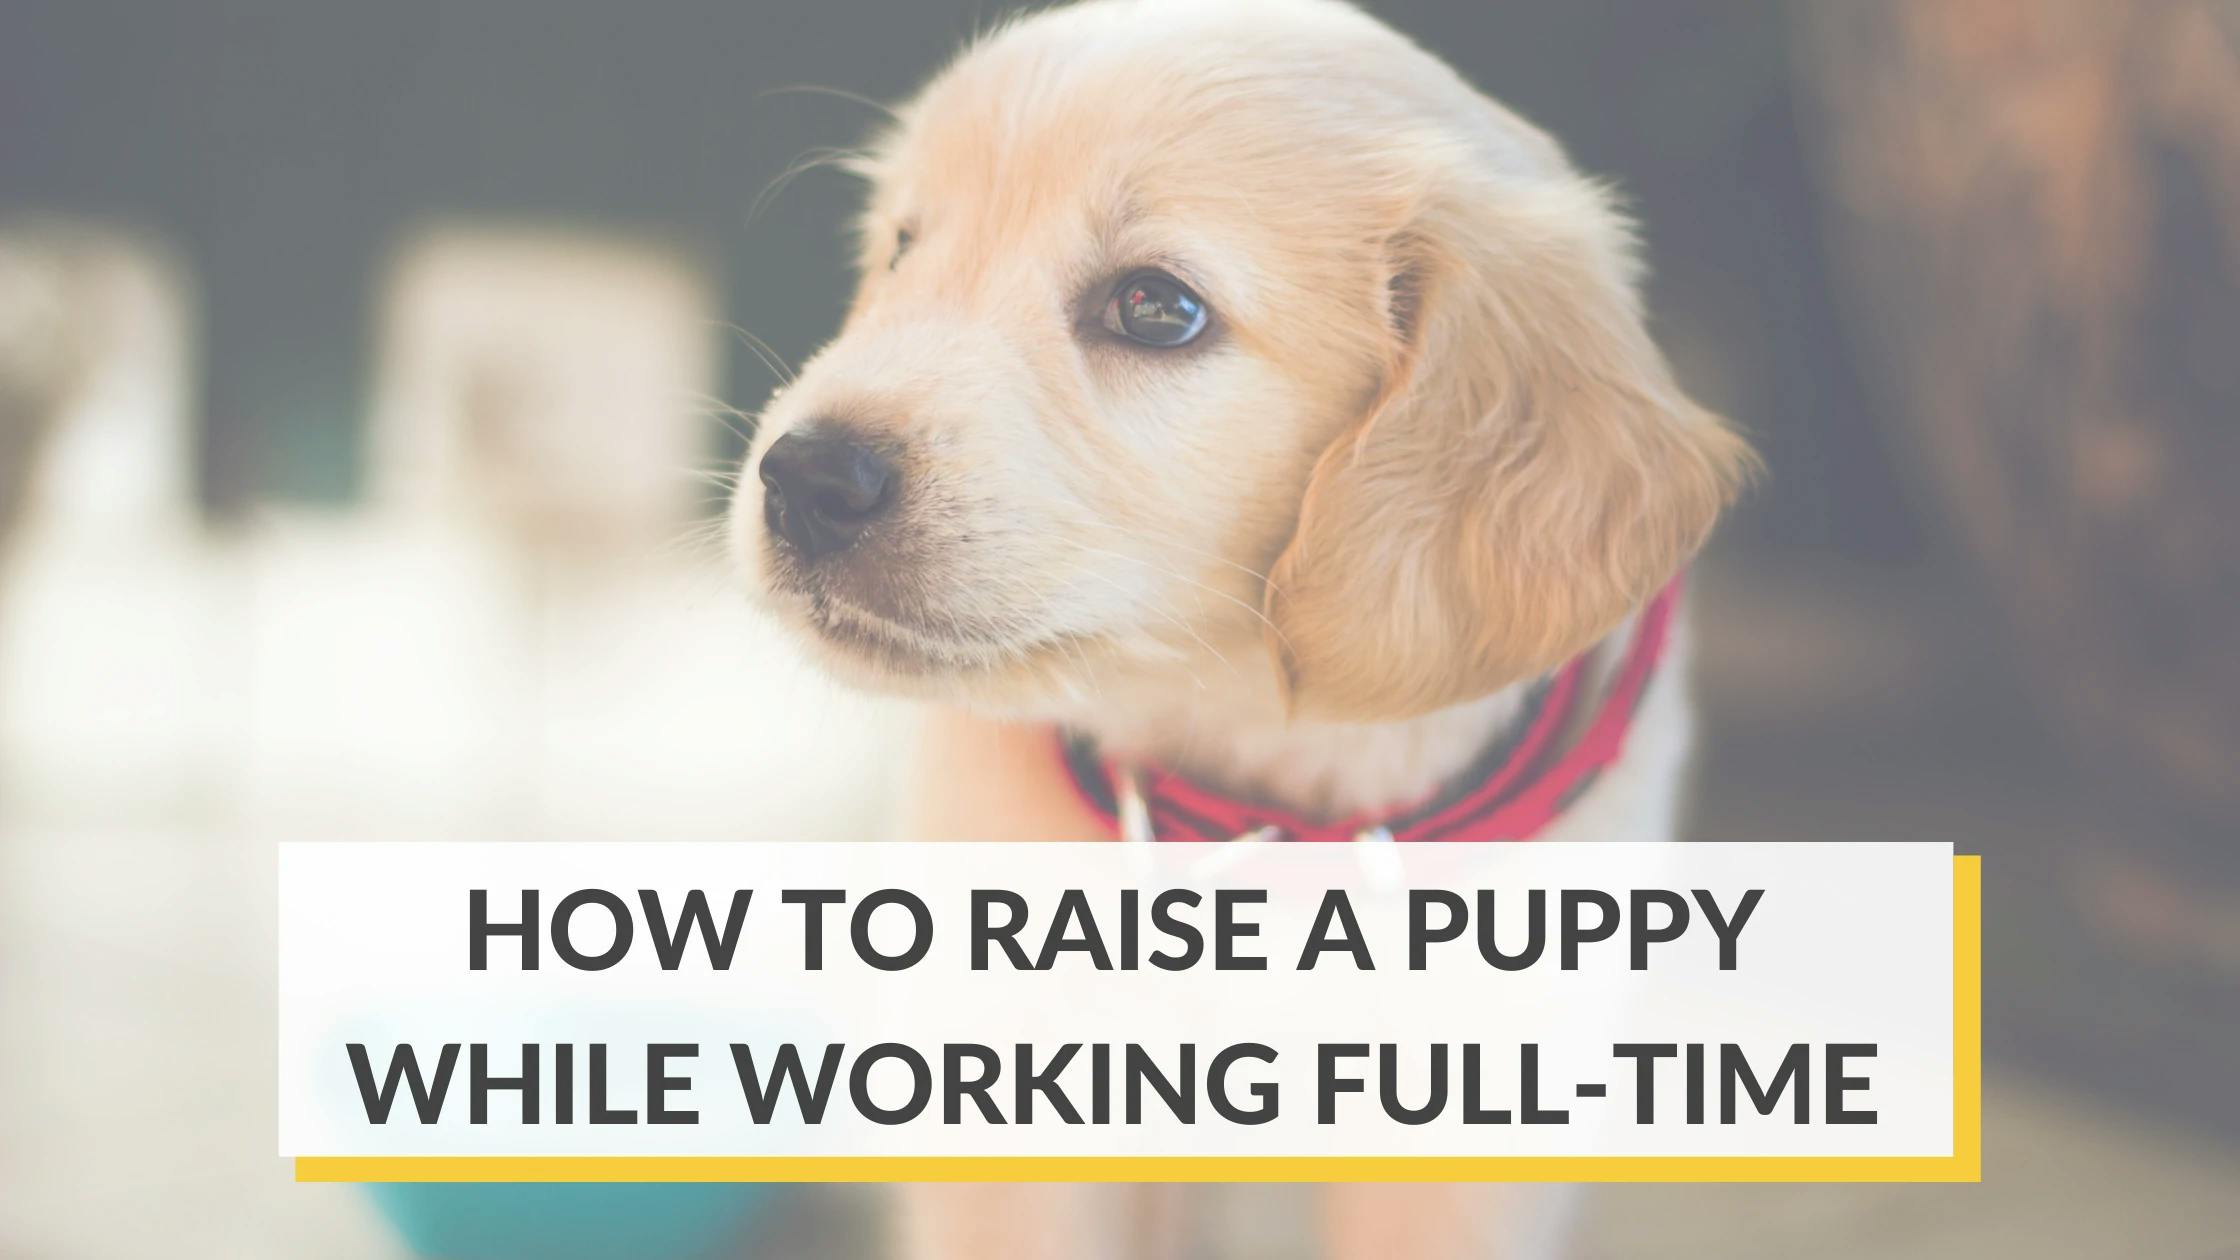 https://images.prismic.io/furbo-prismic/bfdc5d93-37ea-4c93-bb90-11215742194a_raising-a-puppy-while-working-full-time_cover.webp?auto=compress,format